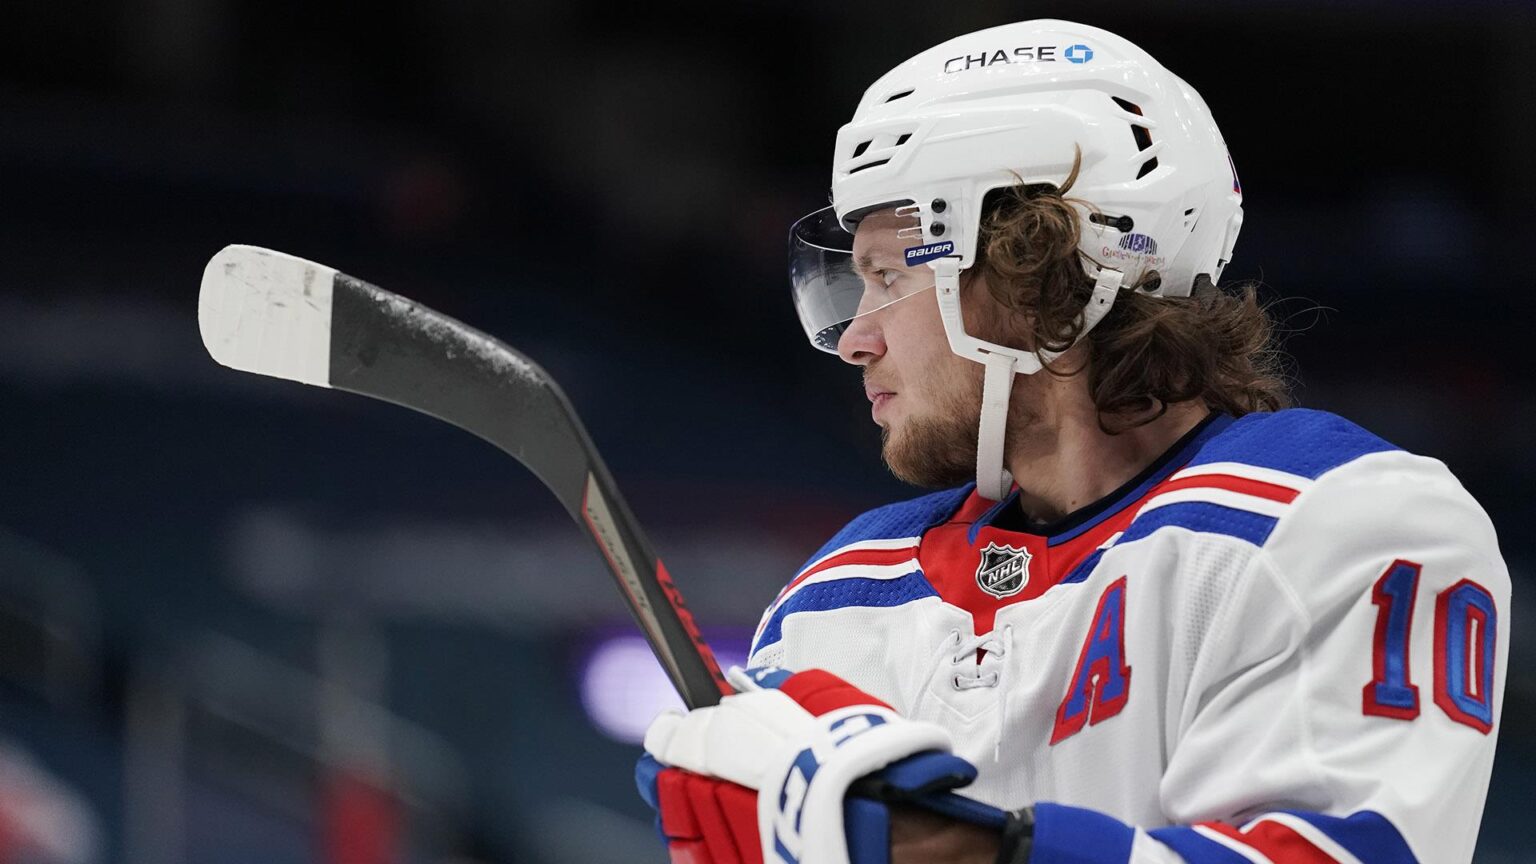 New York Rangers star winger Artemi Panarin is being accused of a 2011 abuse incident in Russia. Does this hockey player's dislike for Putin play a role?